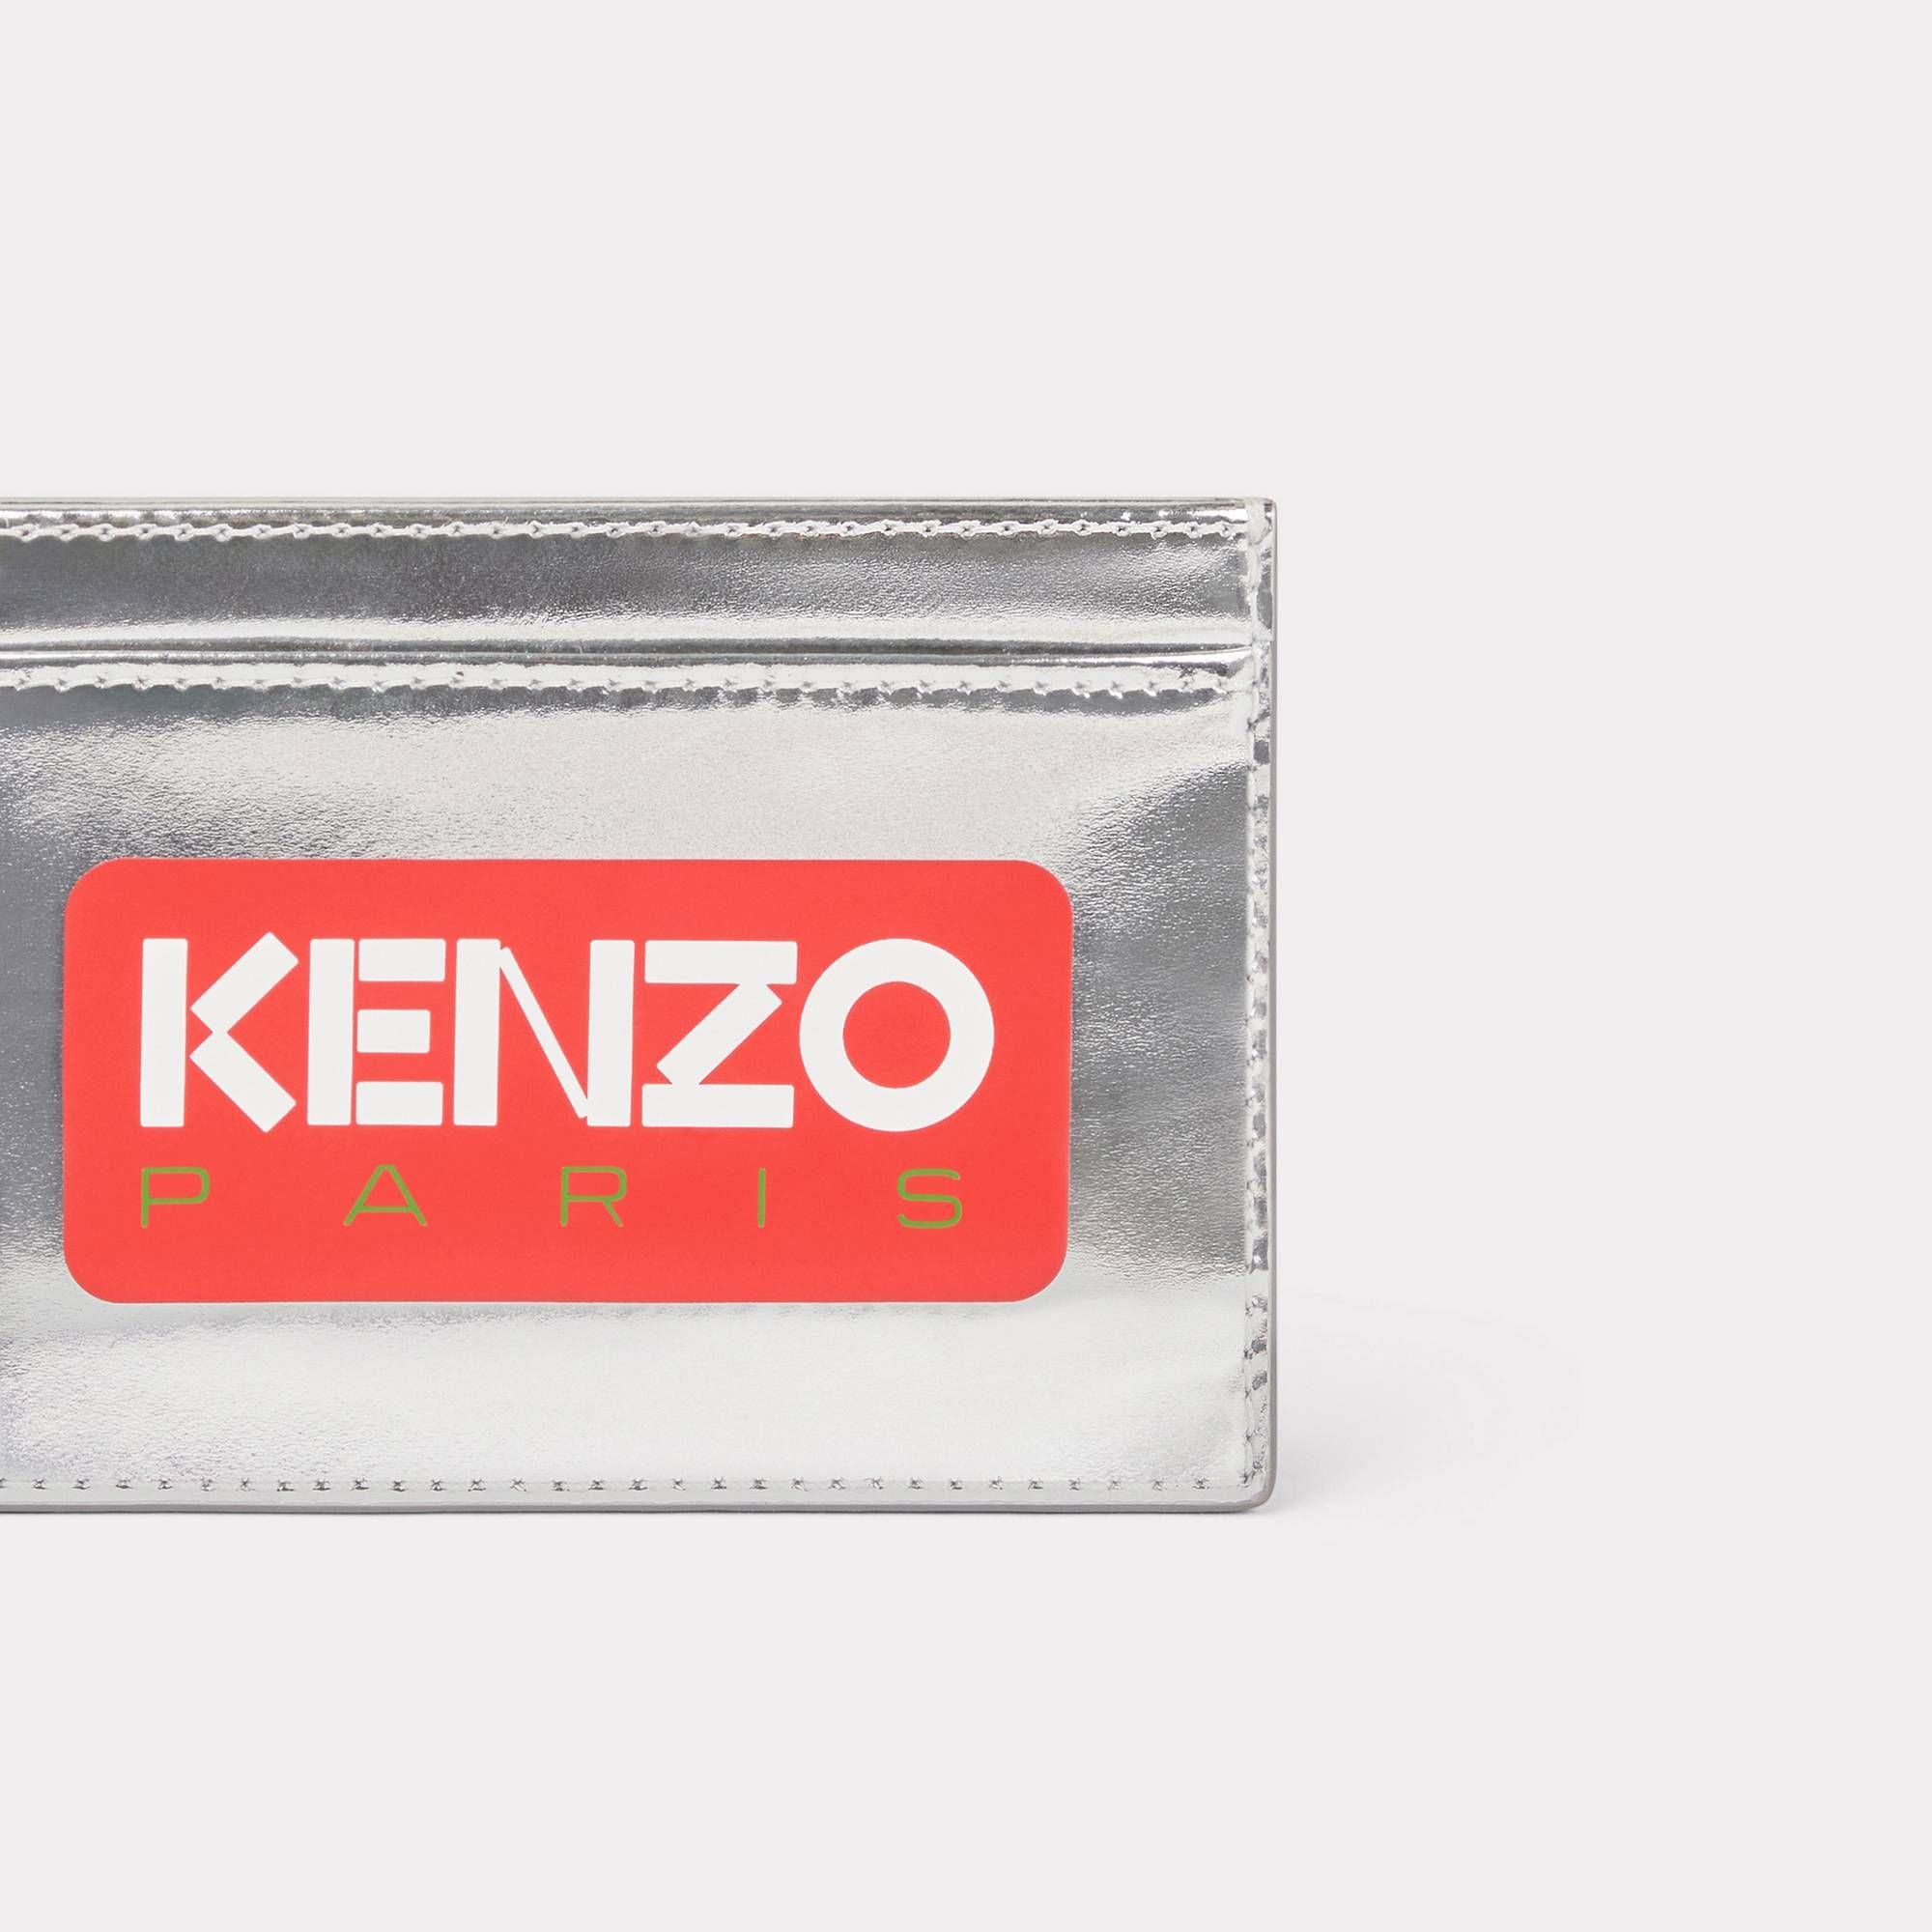  KENZO Paris Leather Card Holder - Silver 